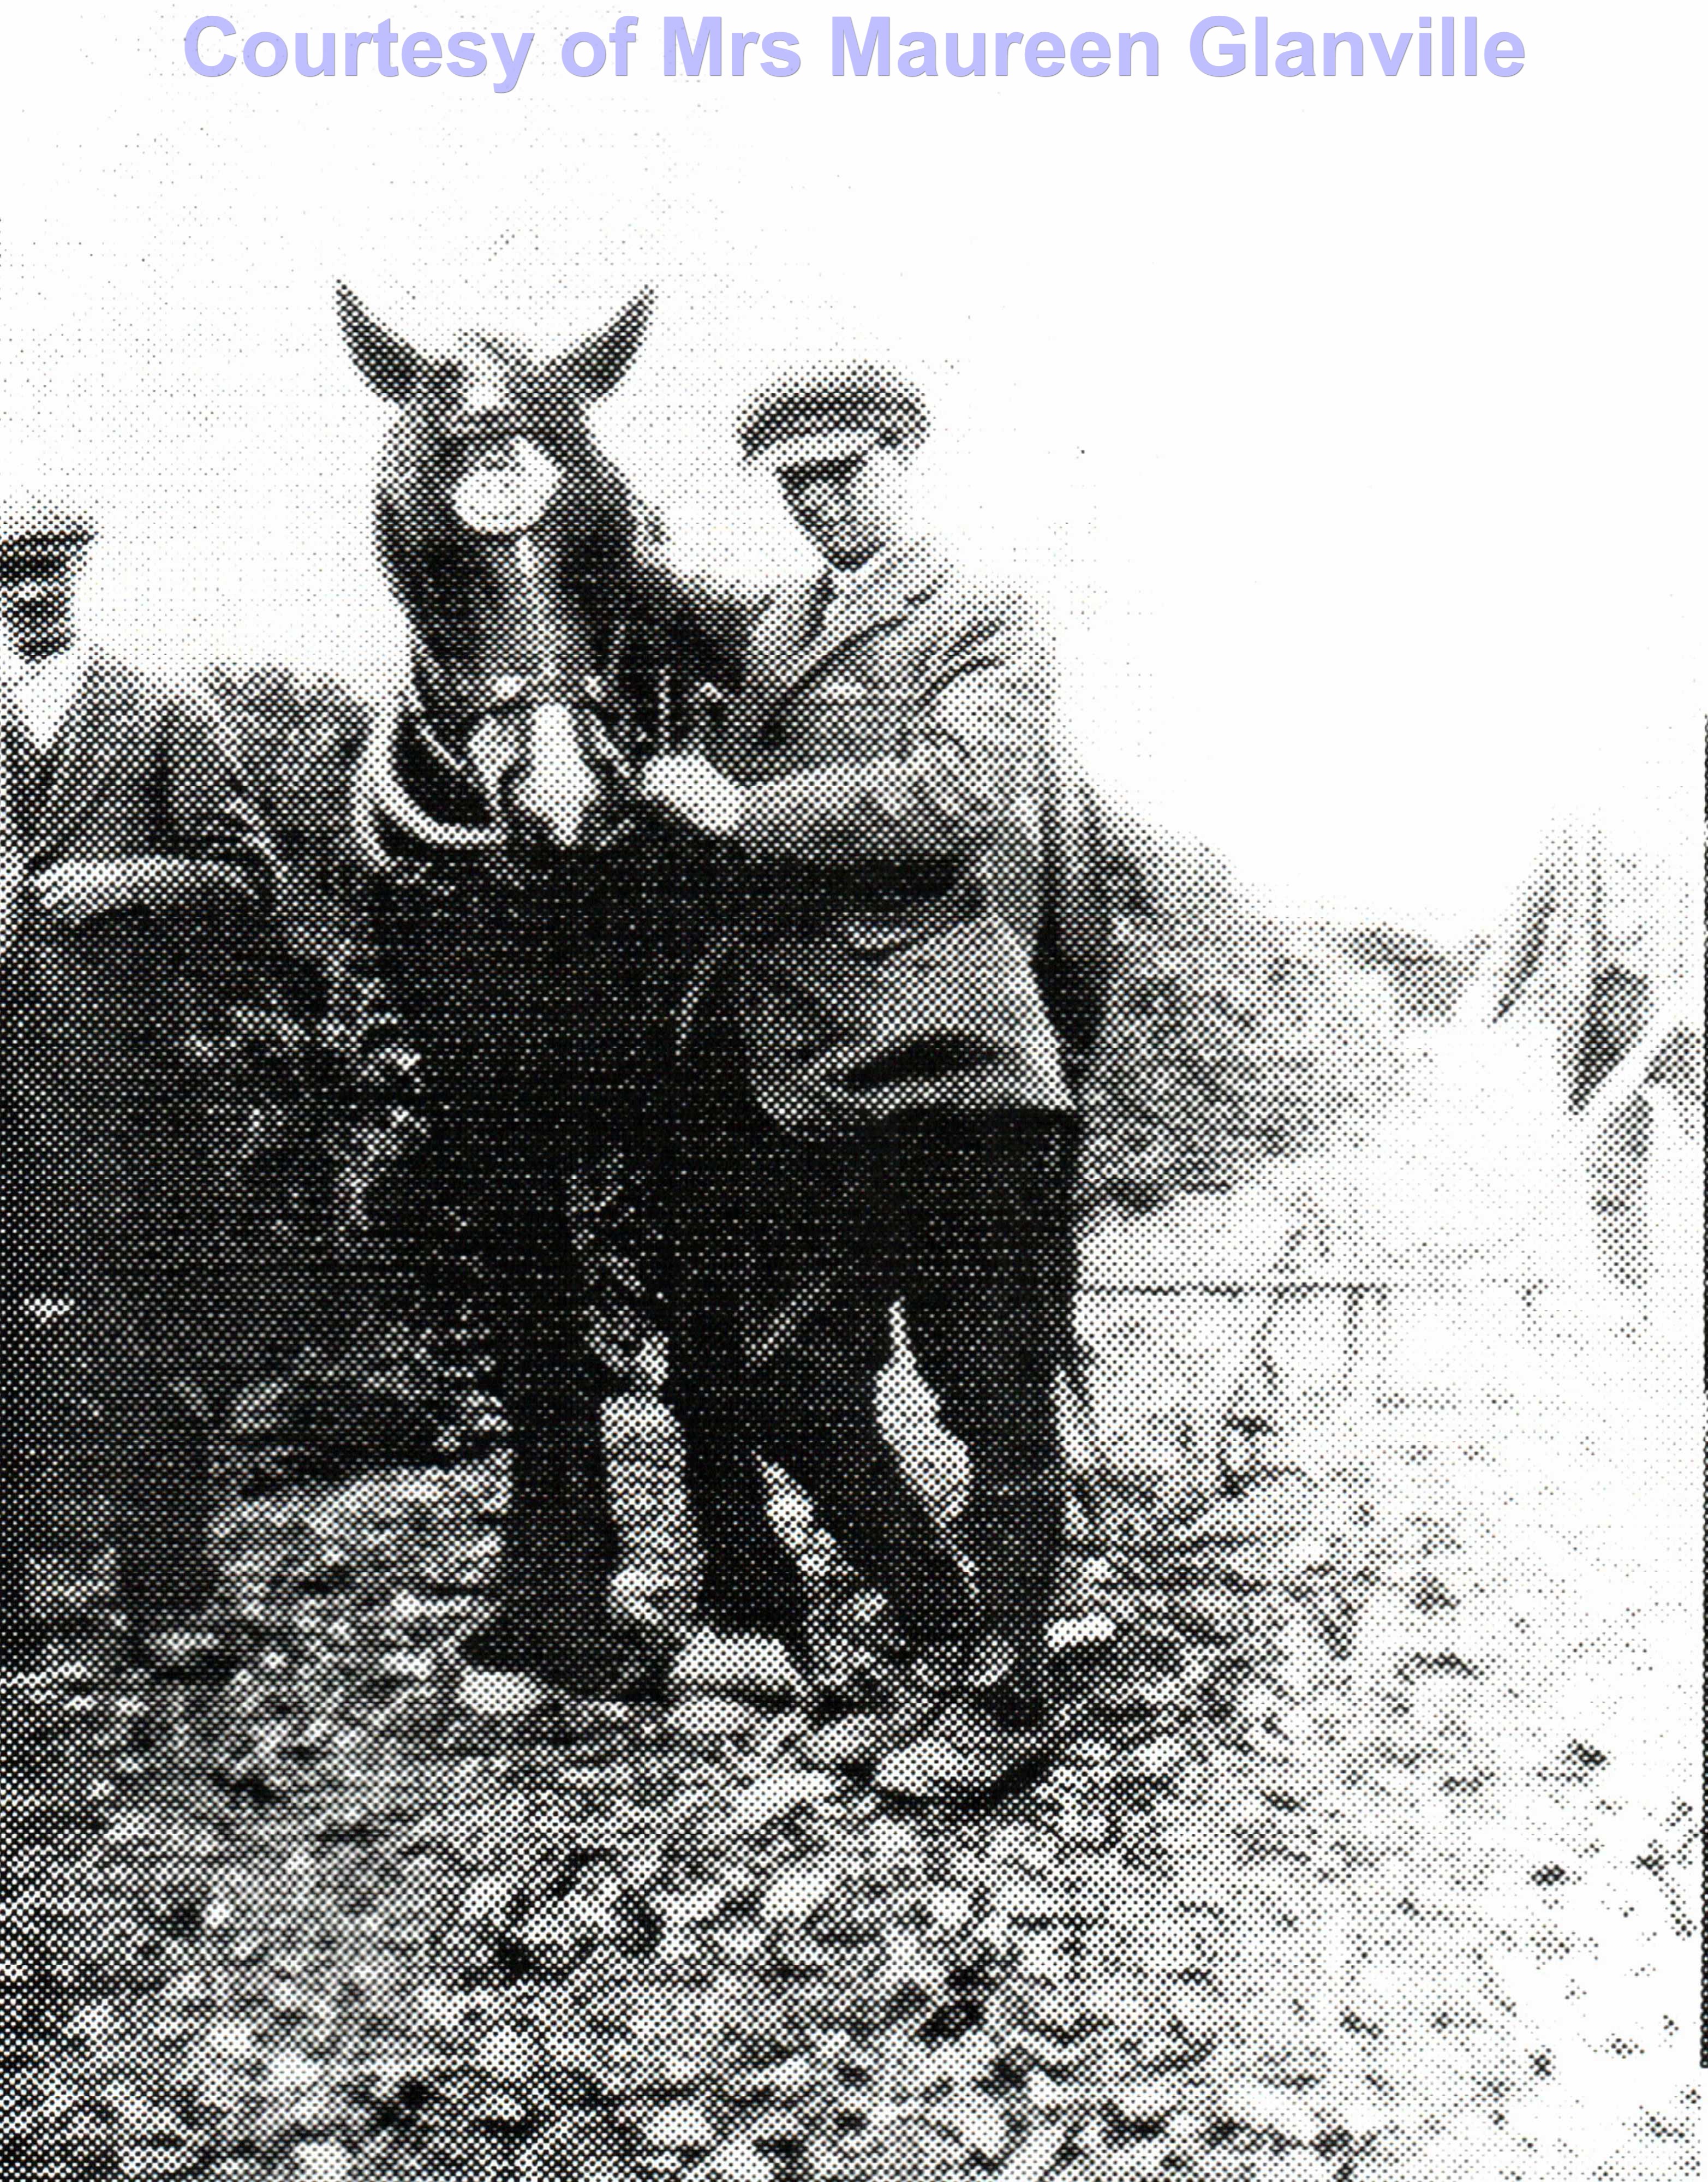 Tiny with Sam Glanville with his horse and chiseller - Circa 1920